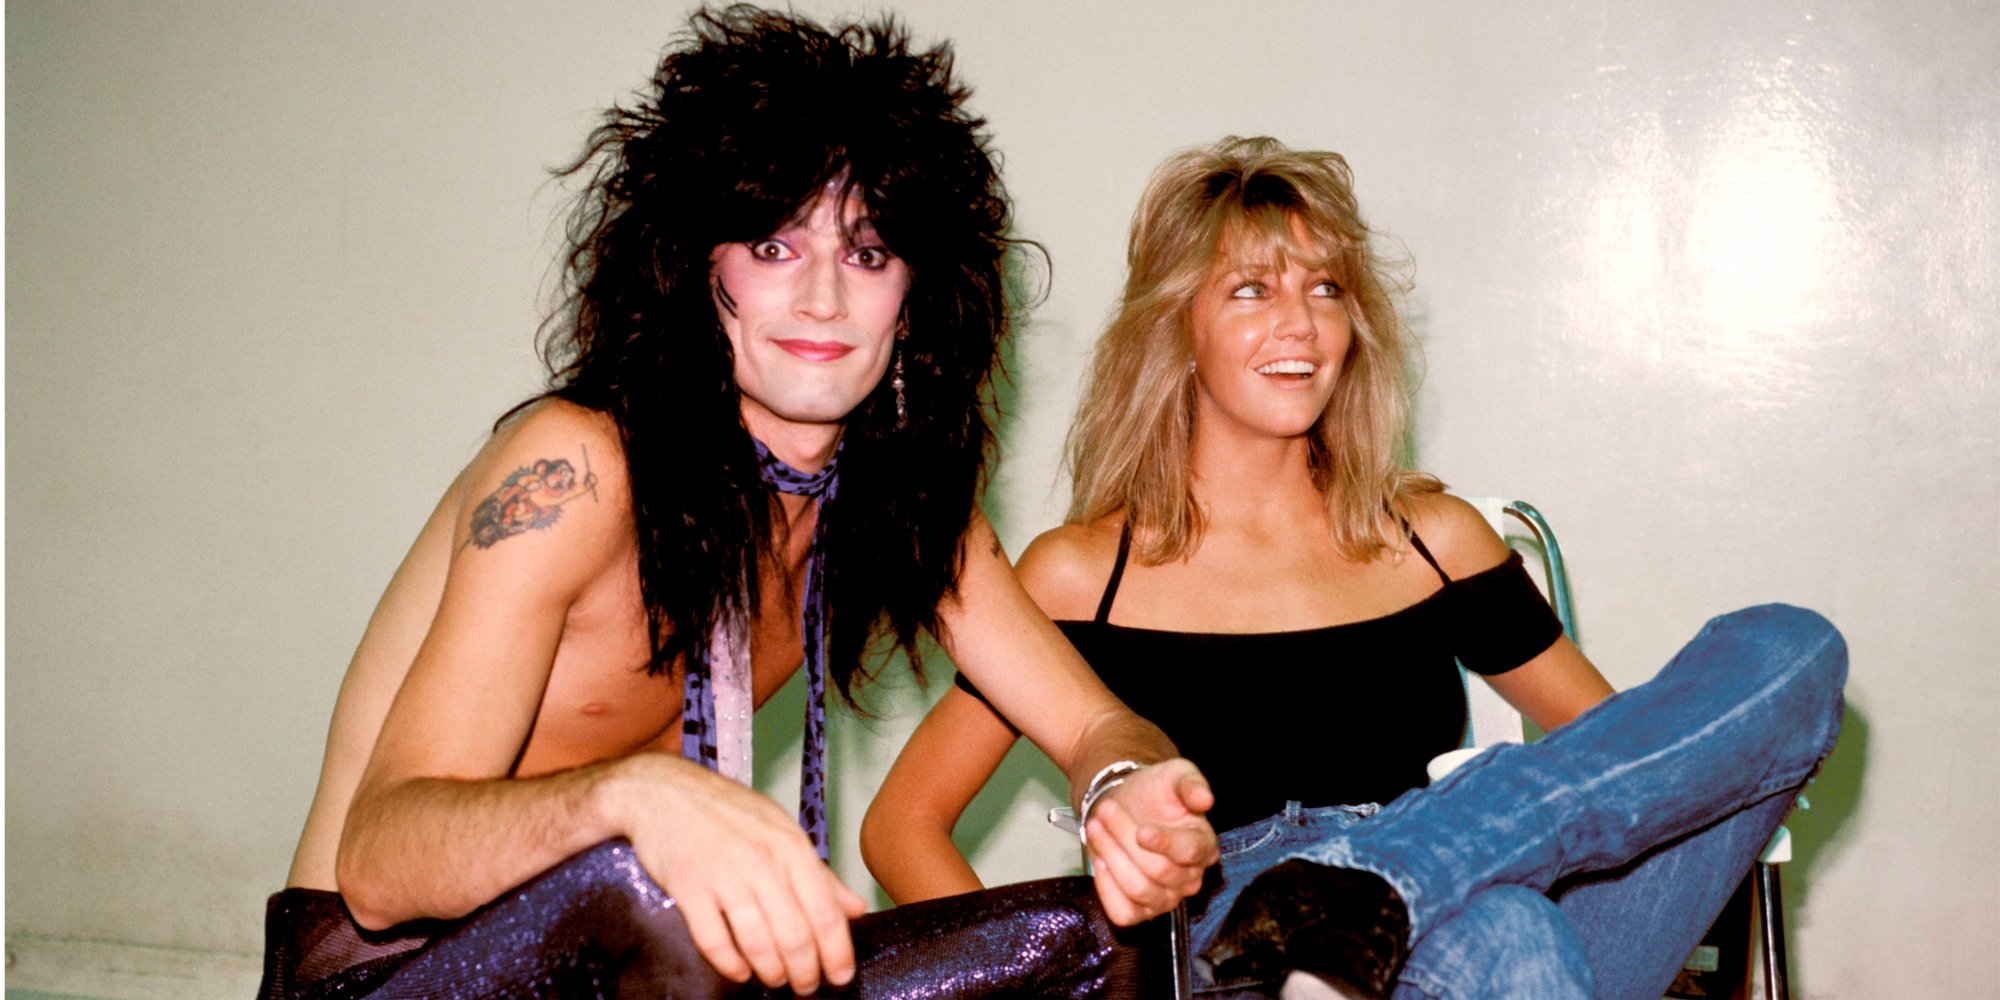 Tommy Lee and Heather Locklear pose for a paparazzi photo in the late 1980s.